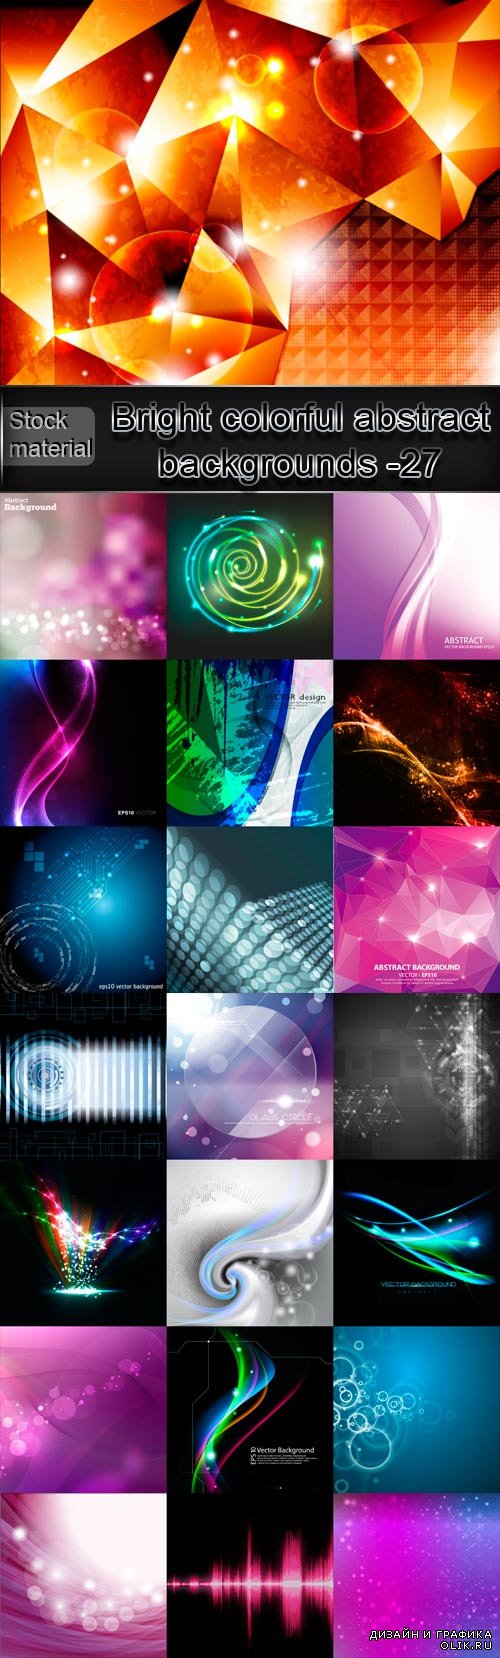 Bright colorful abstract backgrounds vector -27